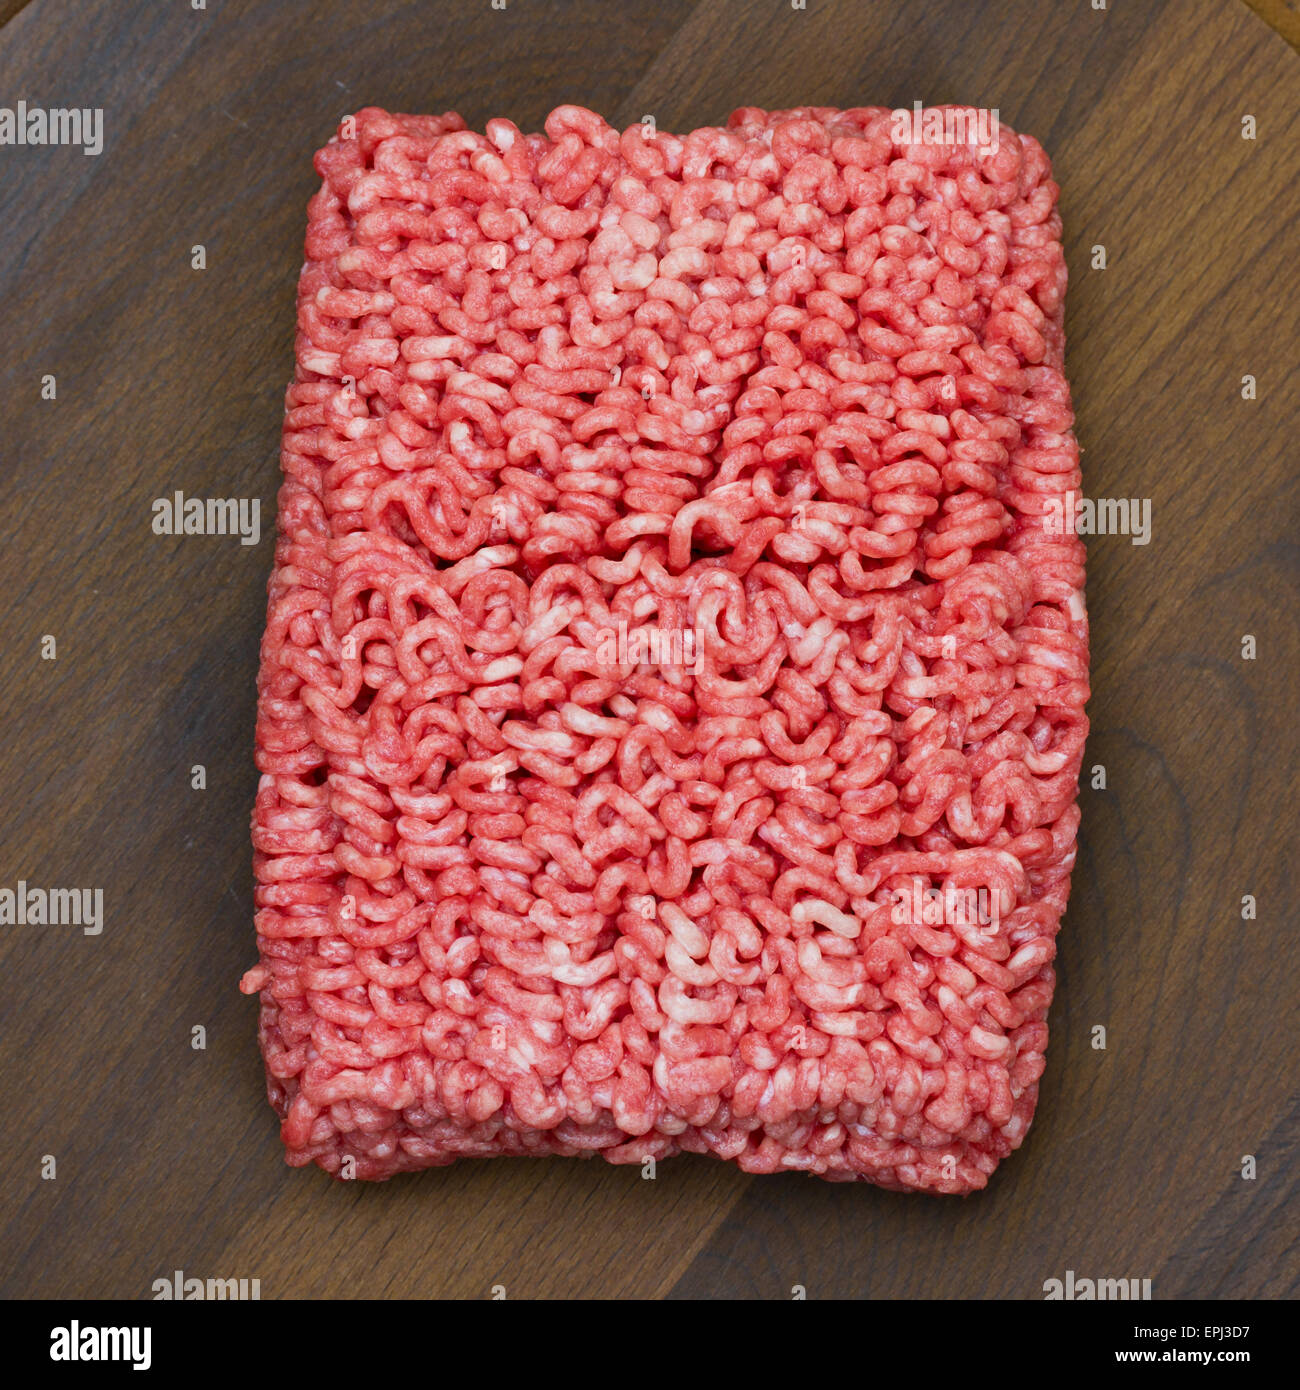 minced meat Stock Photo